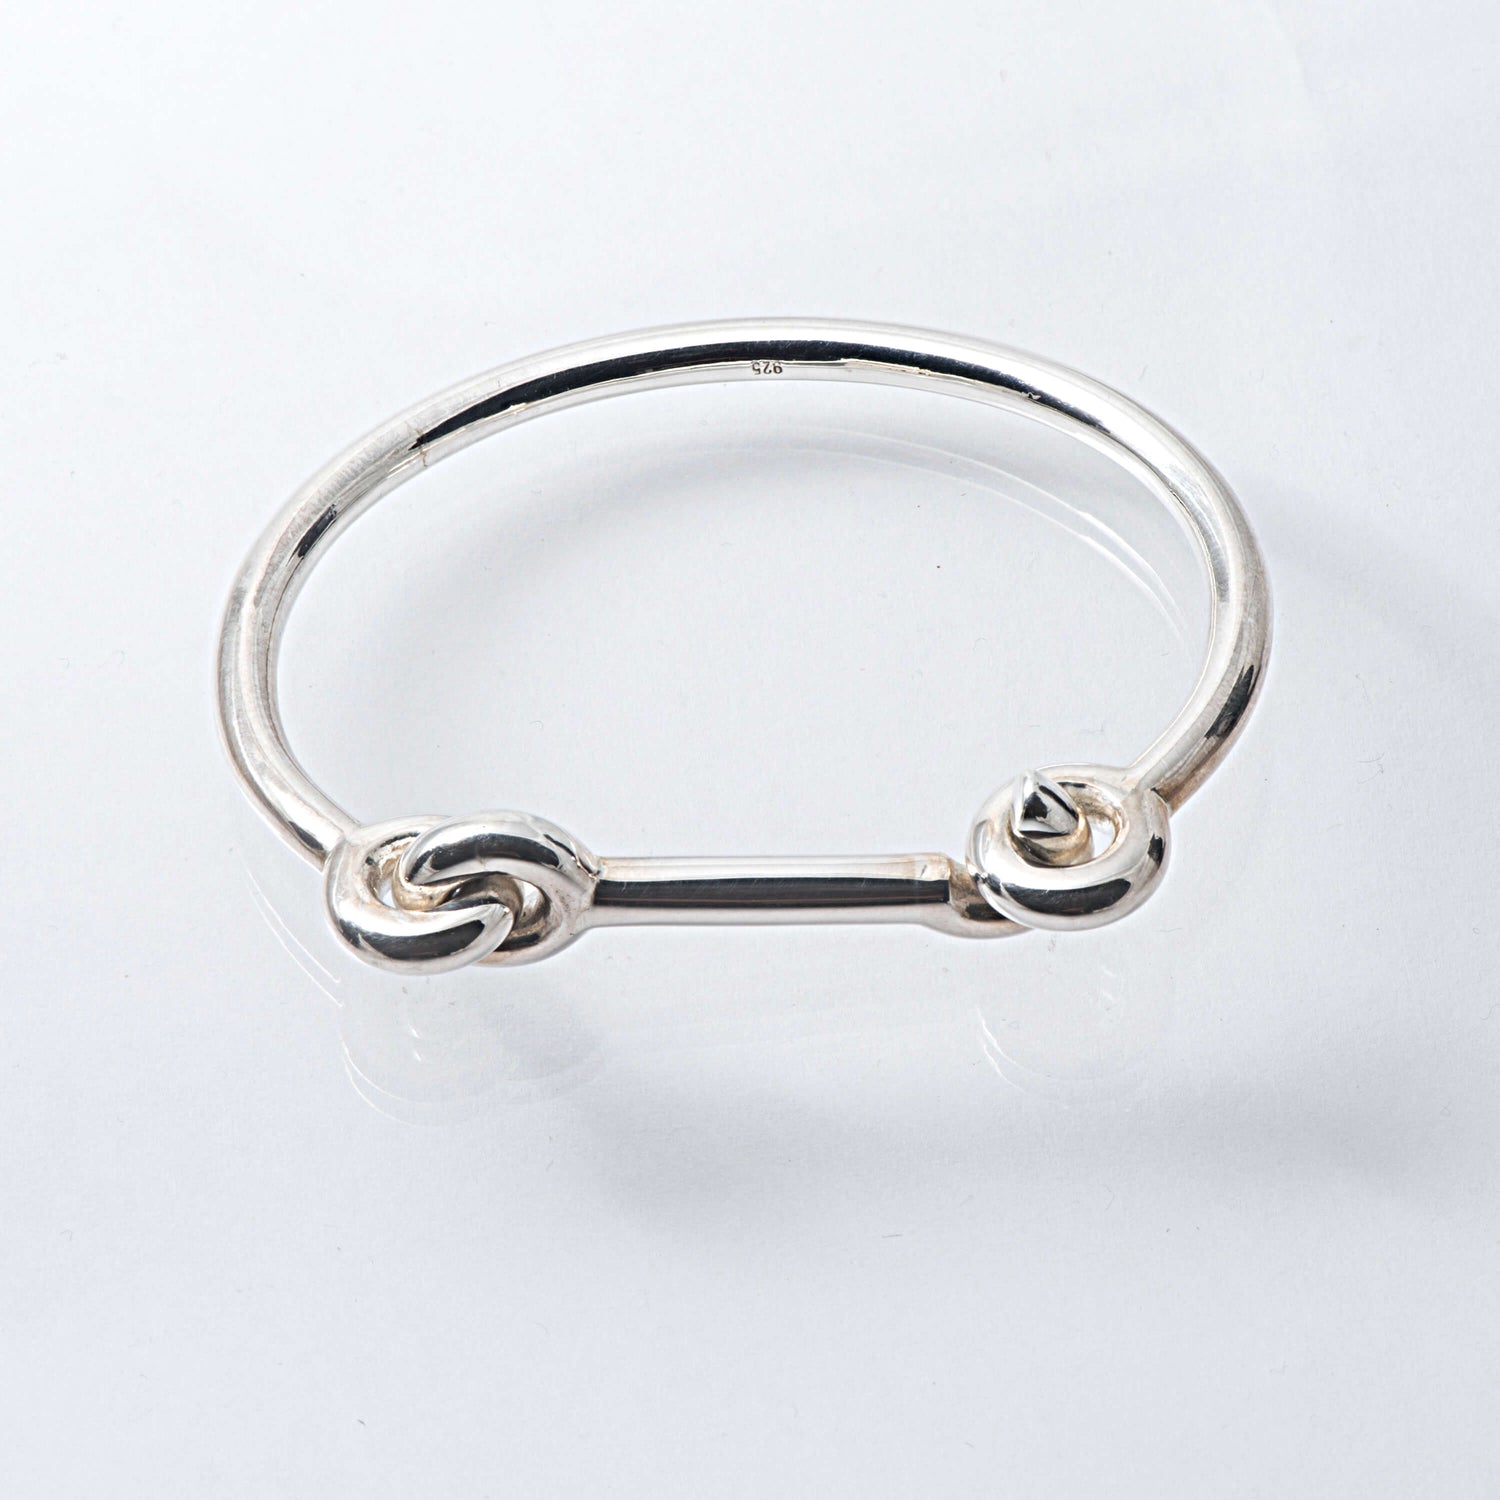 Solid Sterling Silver Snap Bangle